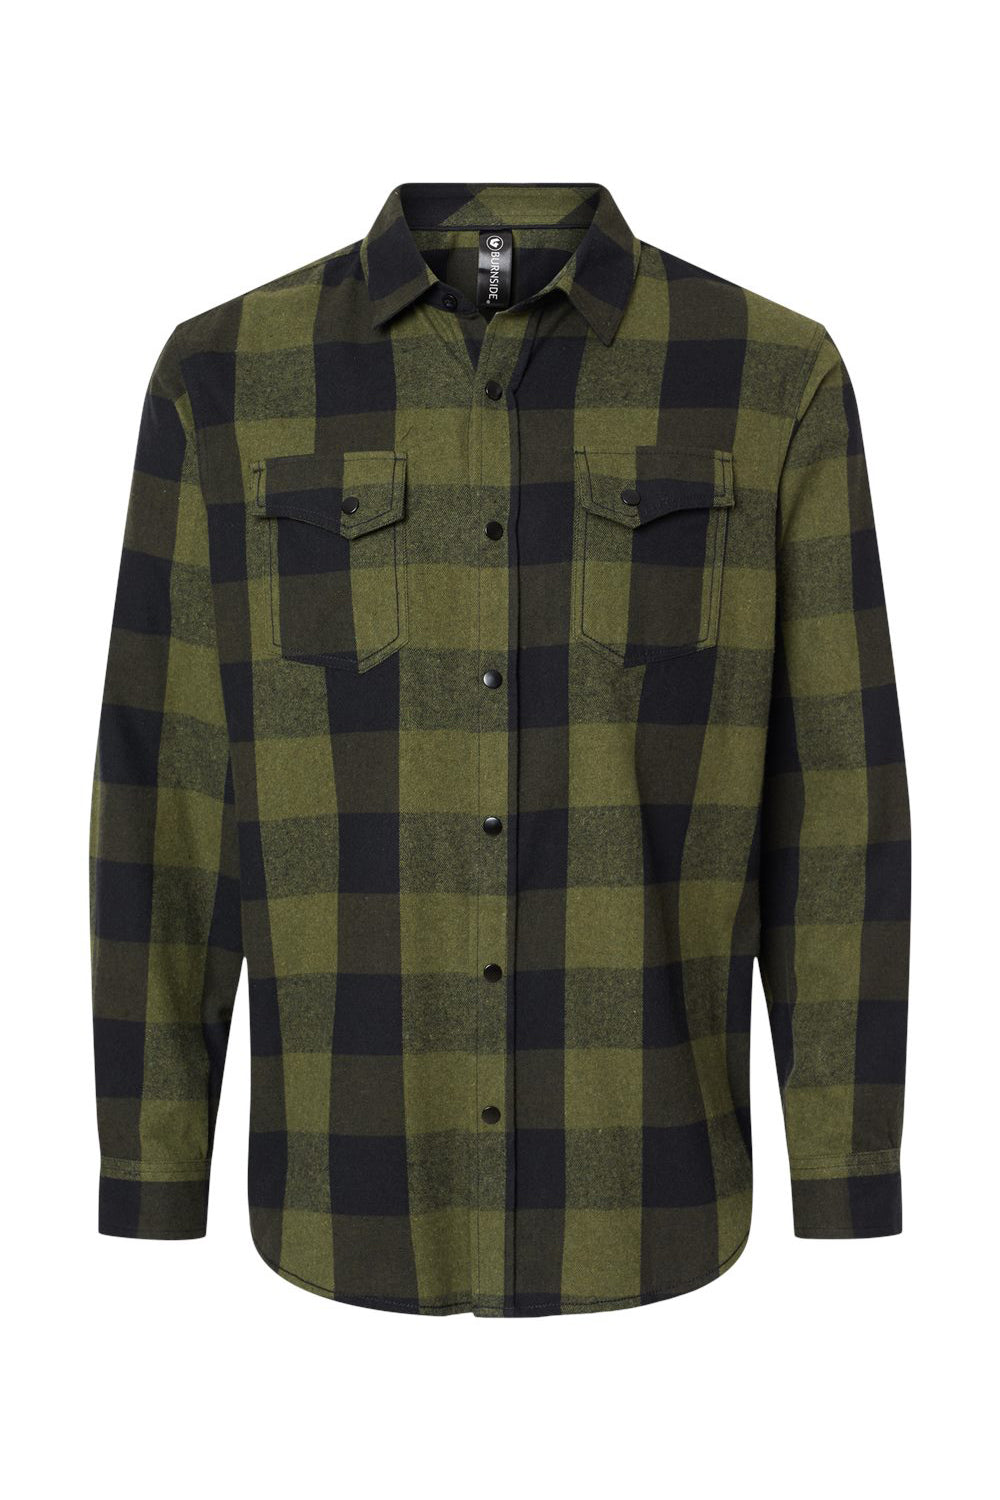 Burnside 8219 Mens Plaid Flannel Long Sleeve Snap Down Shirt w/ Double Pockets Army Green/Black Flat Front